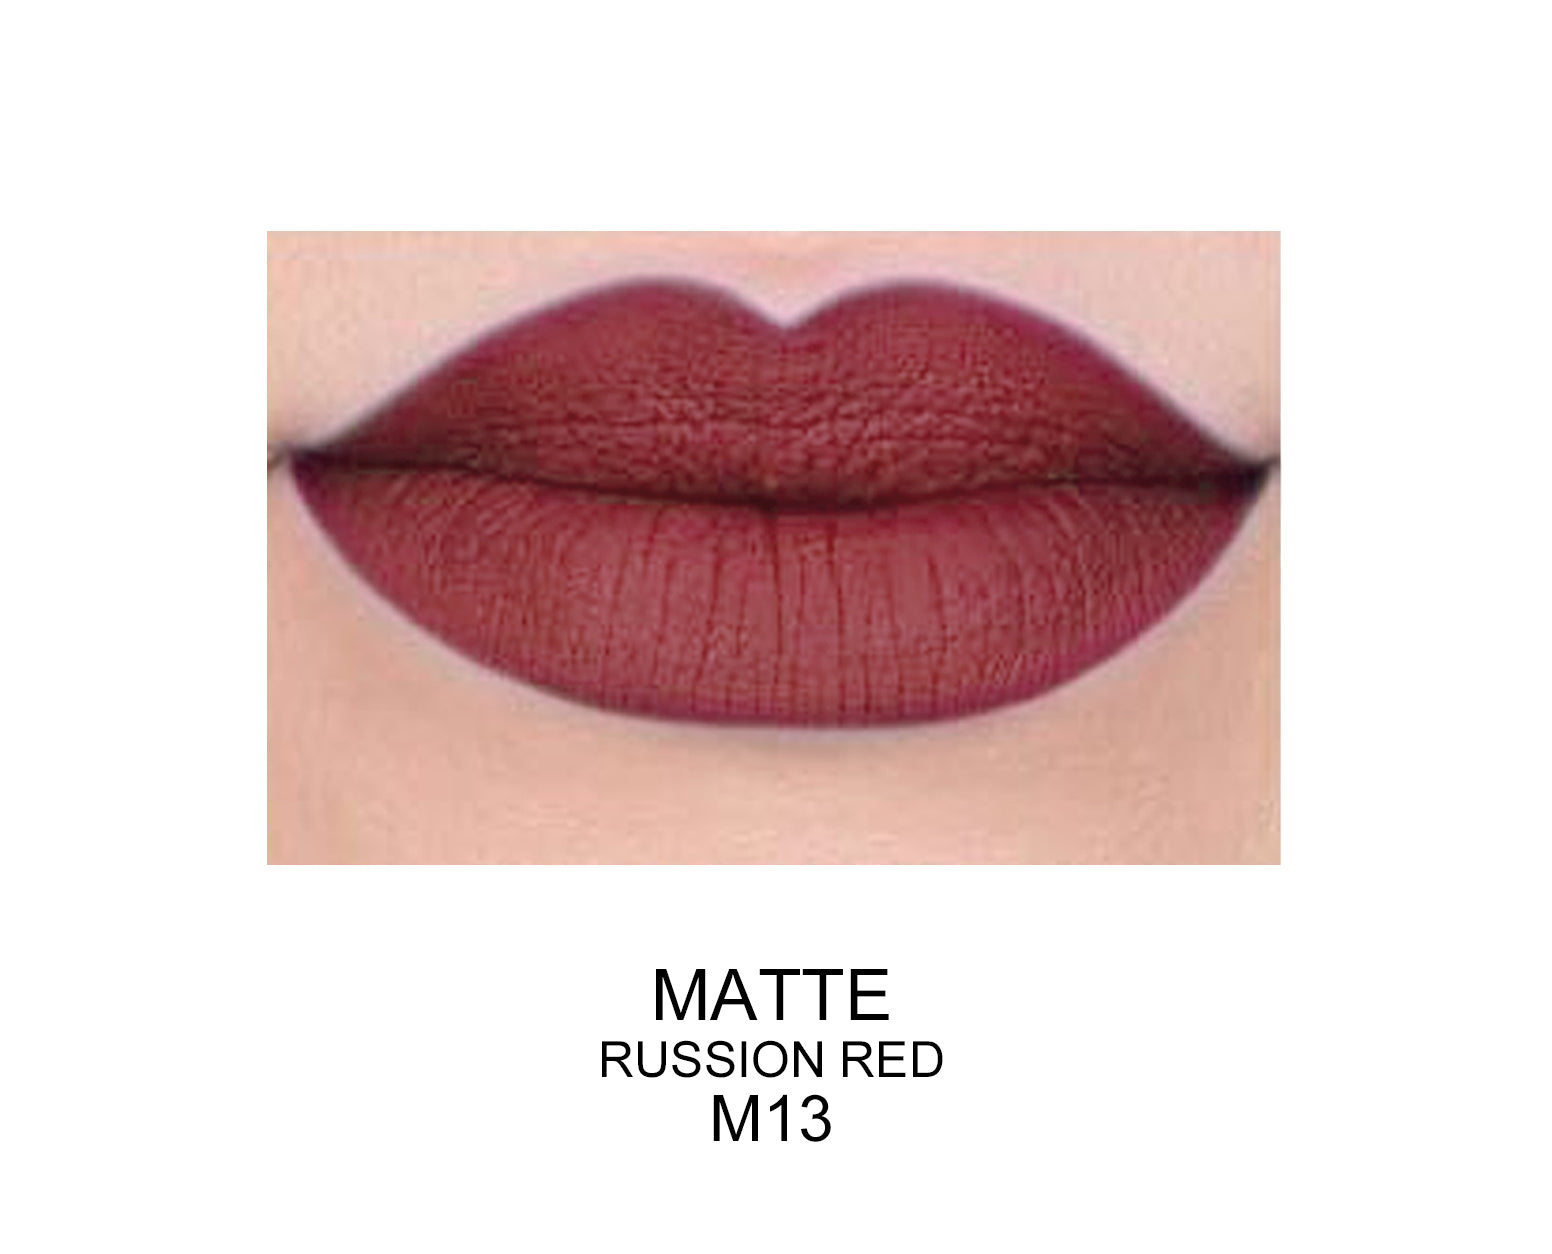 Long Lasting Matte Lip Gloss russion red m13